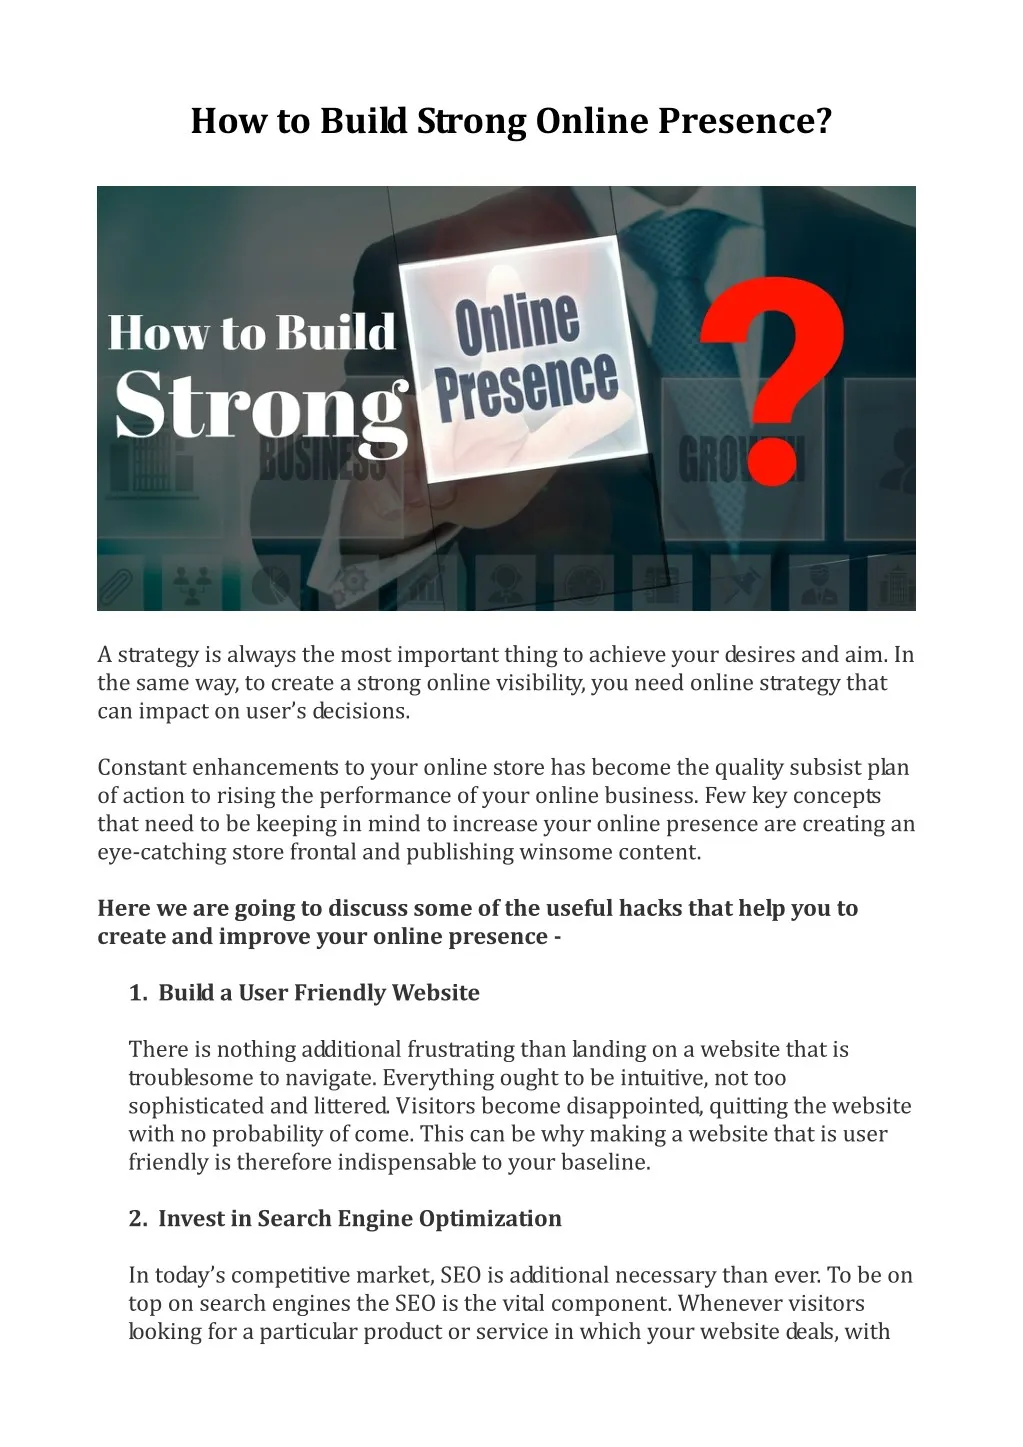 how to build strong online presence